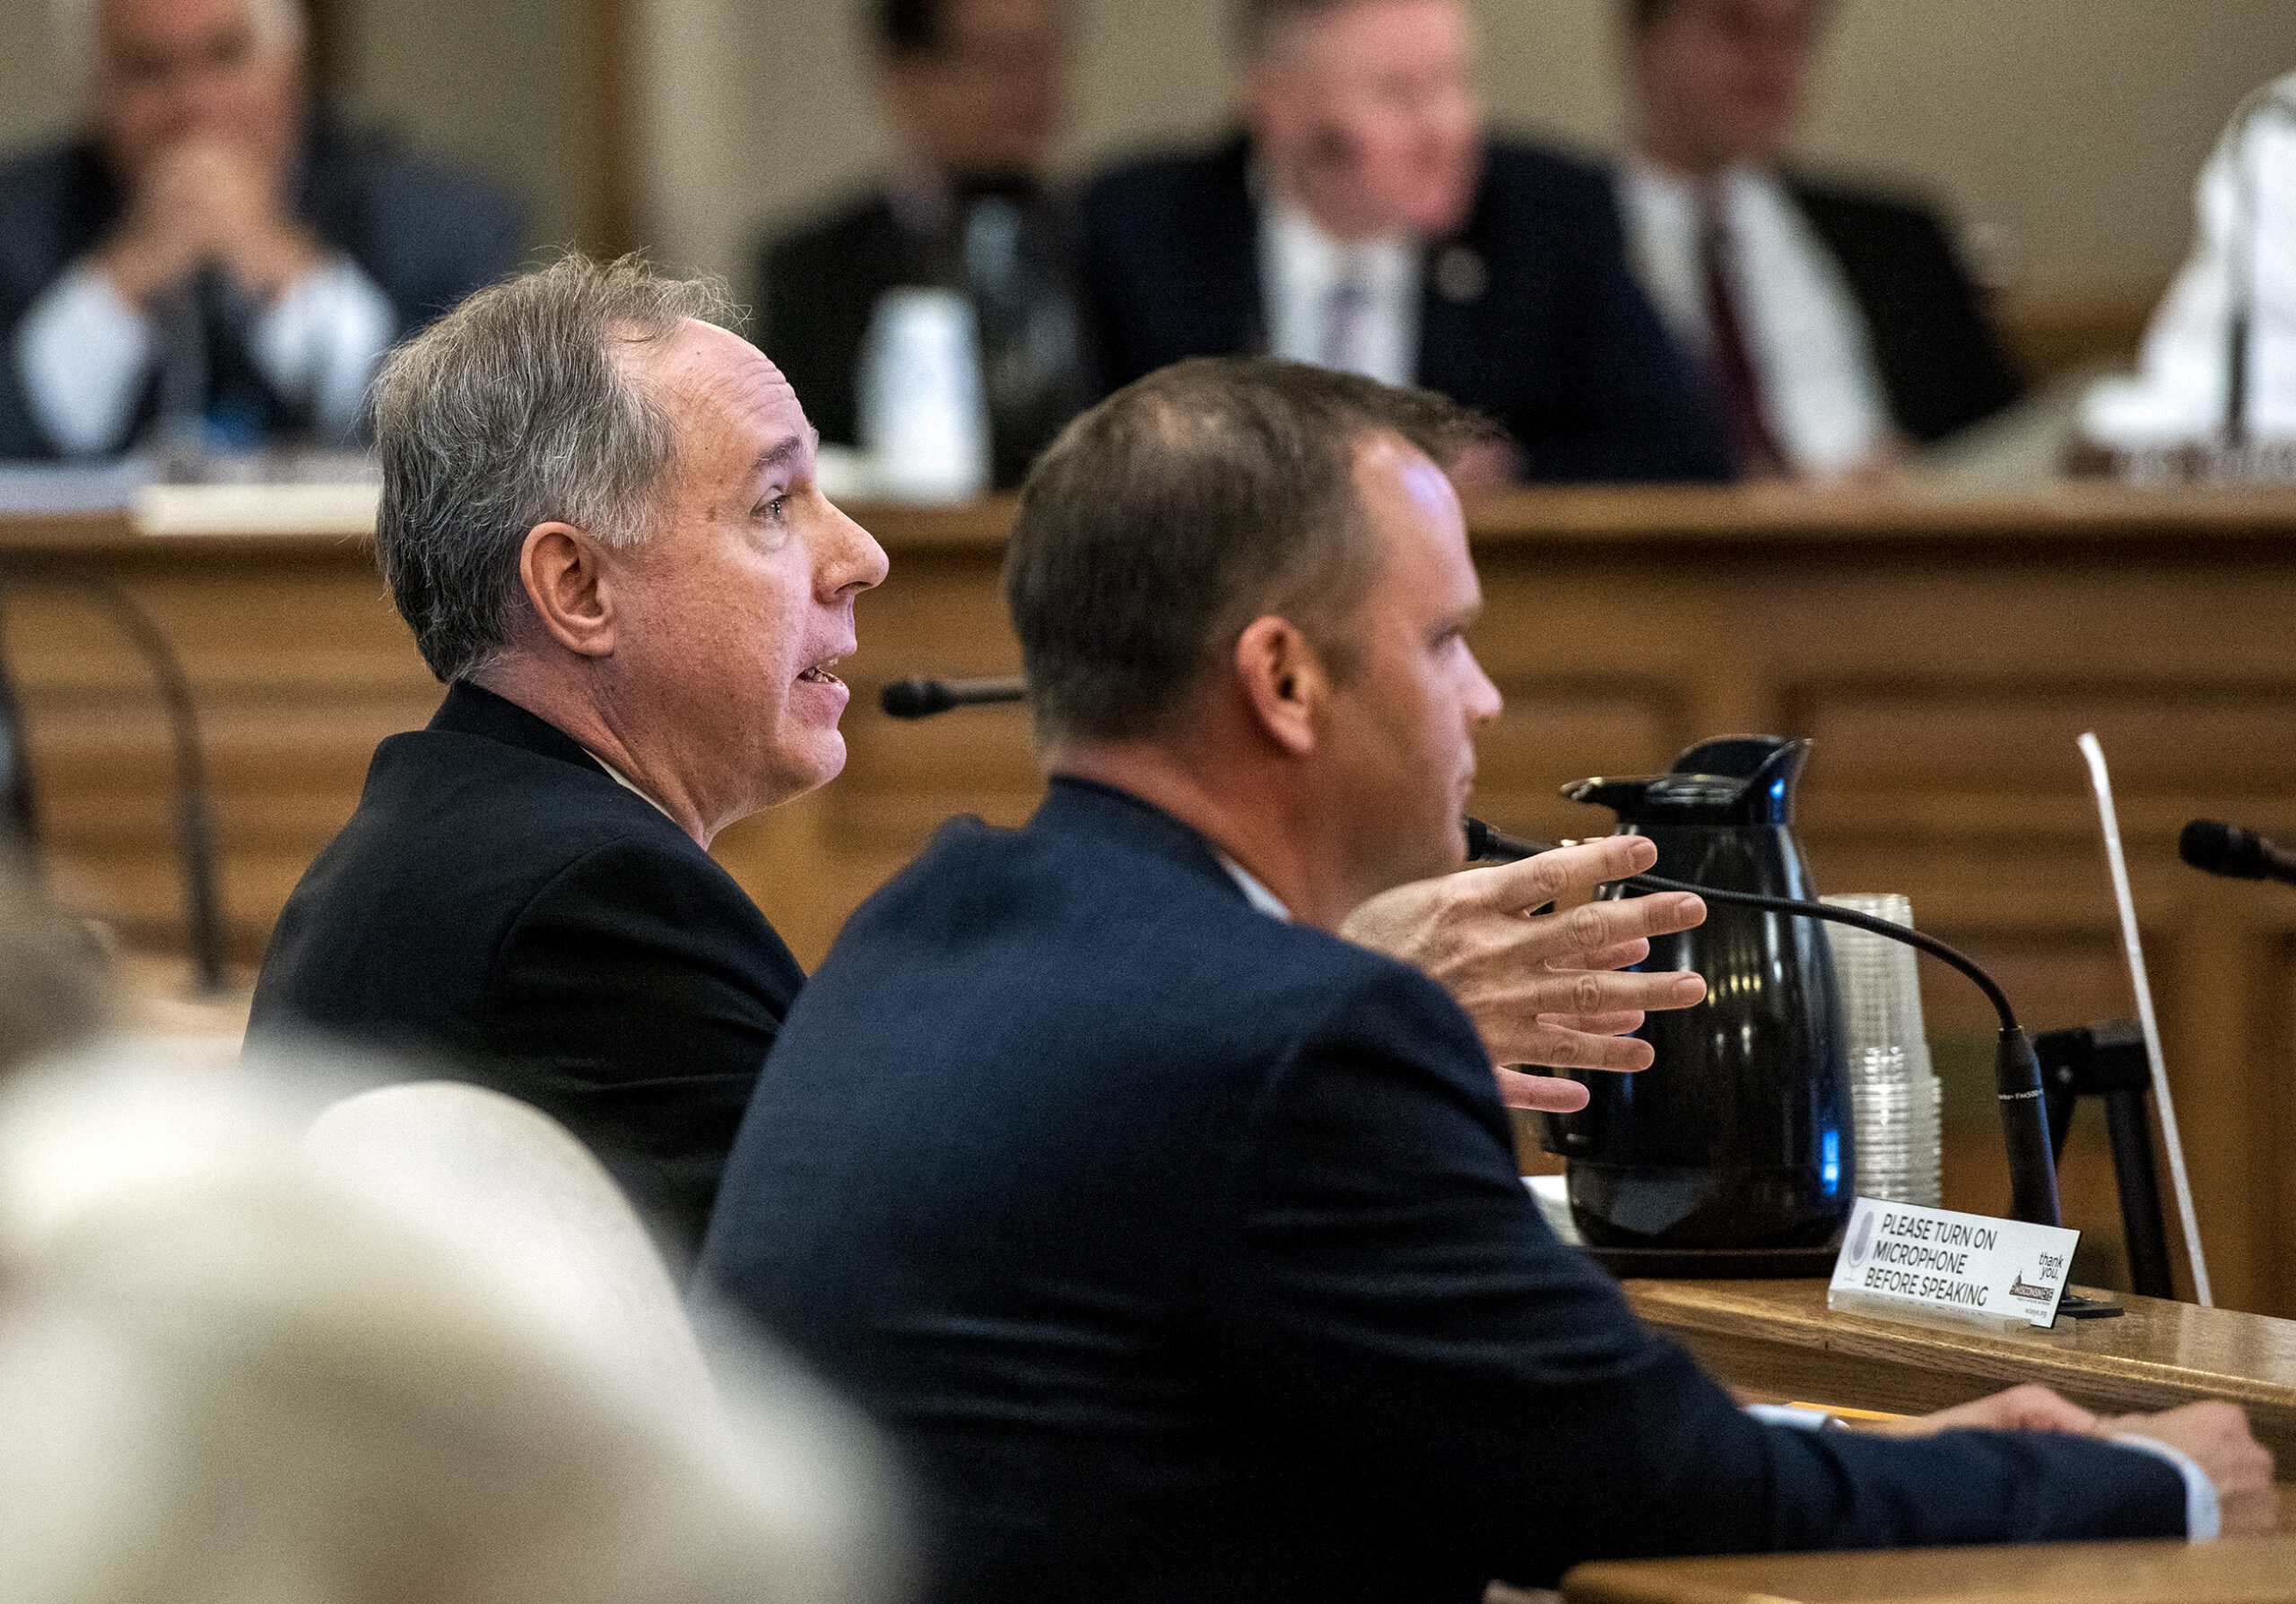 Wisconsin Assembly Speaker Robin Vos gestures as he speaks while seated in front of other state legislators.